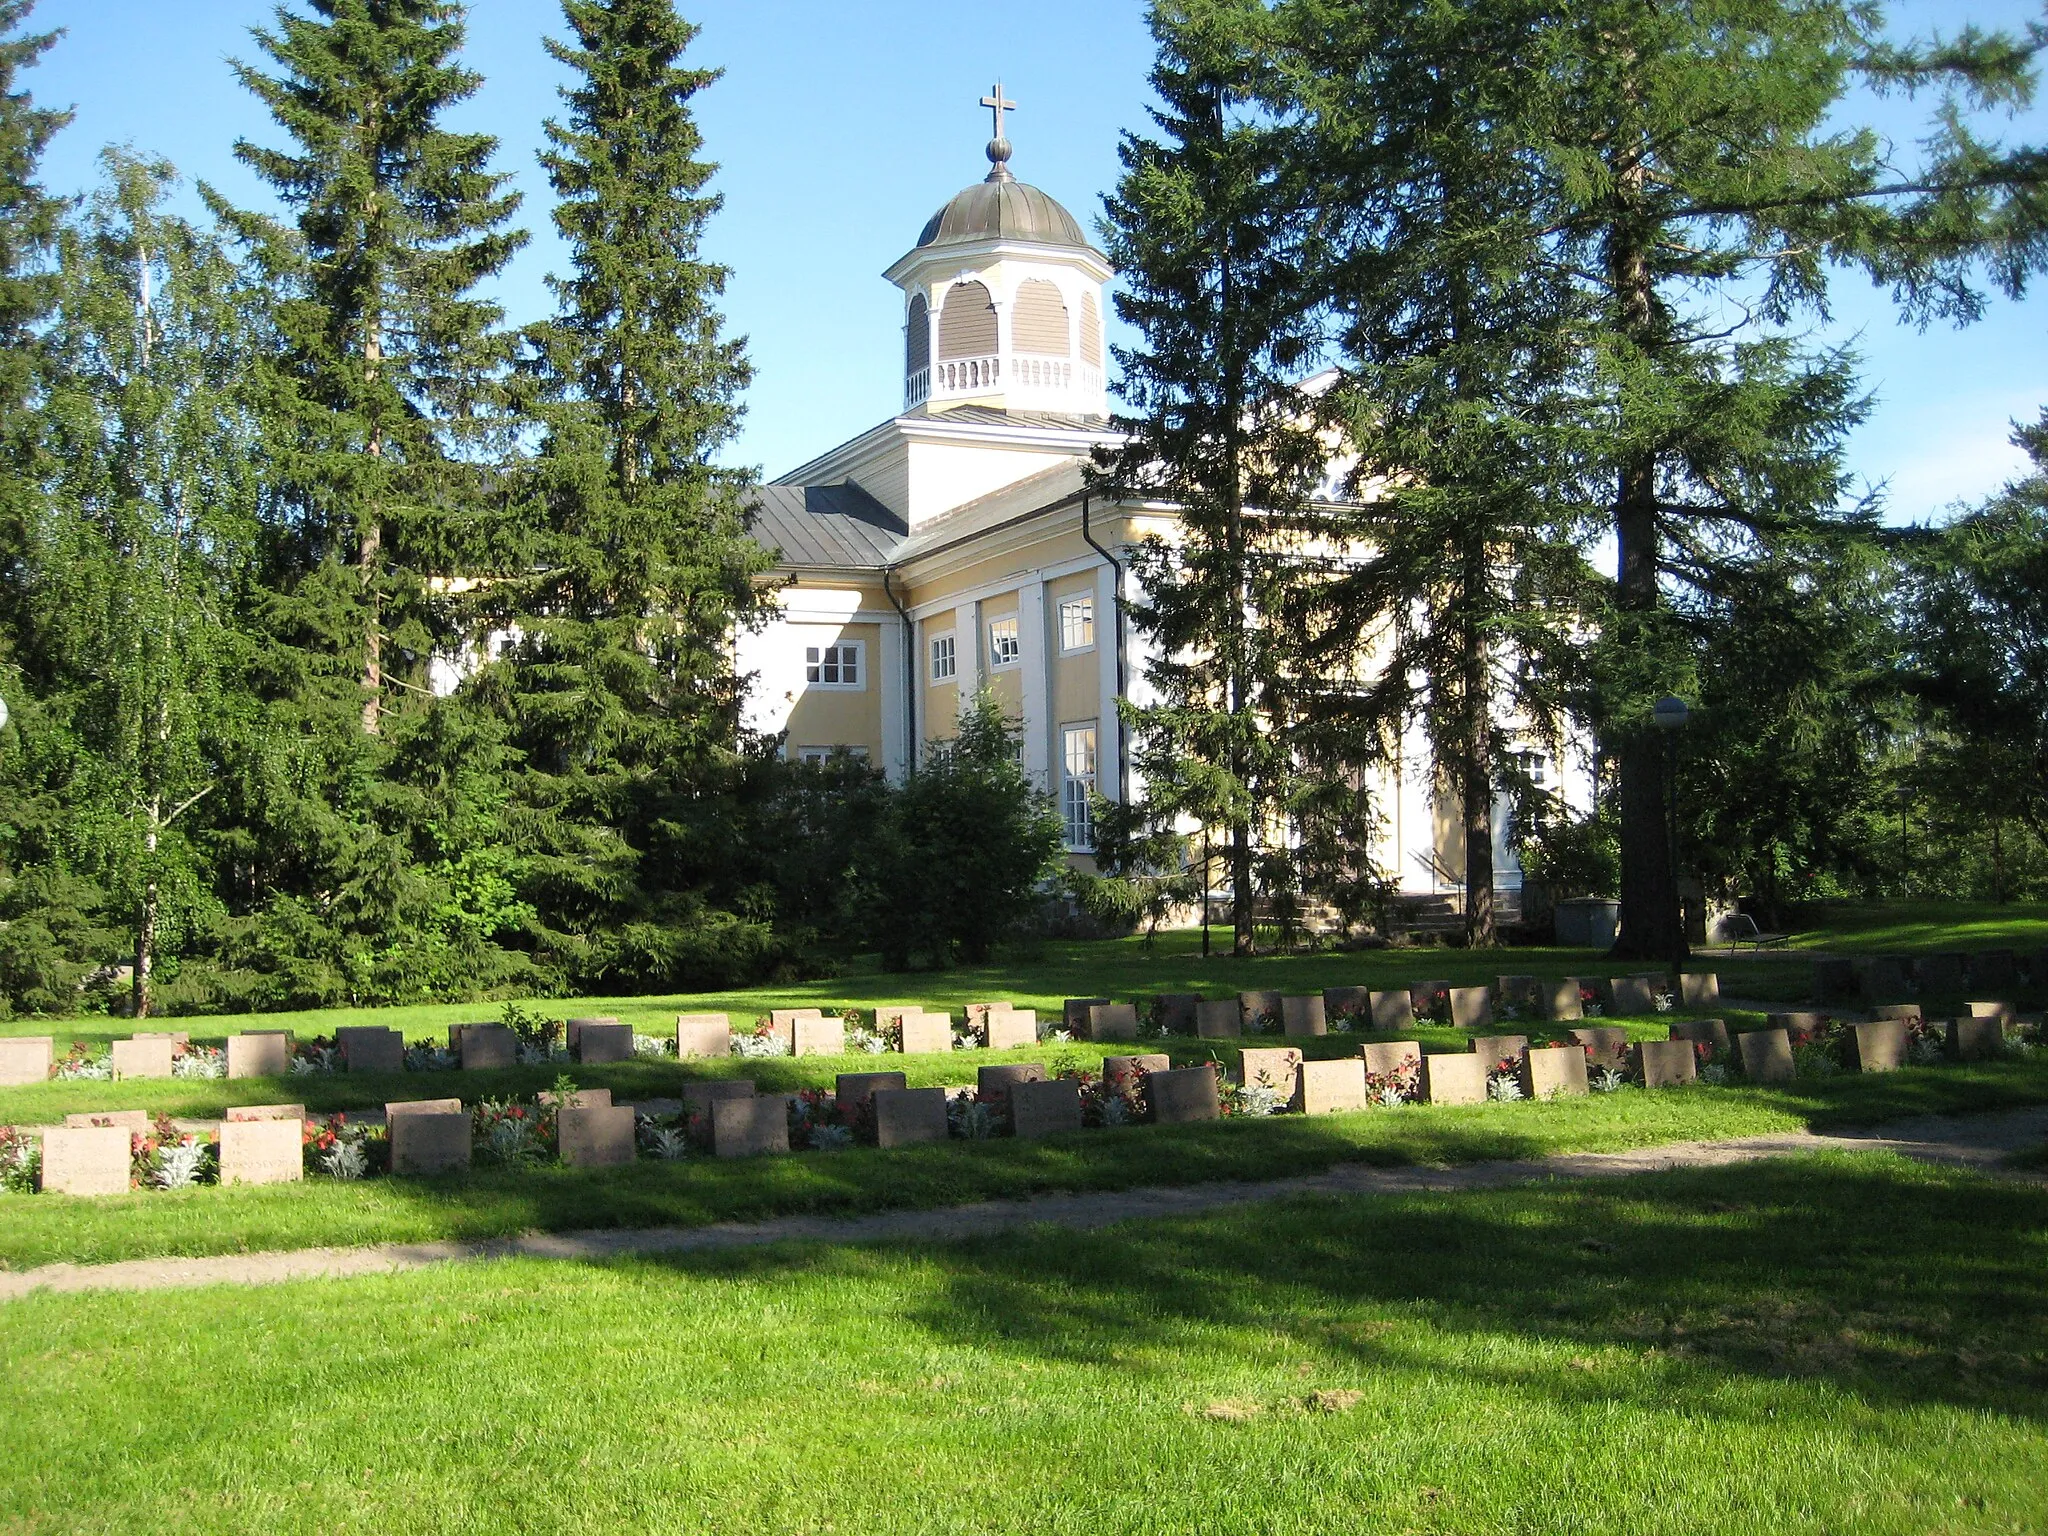 Photo showing: The military cemetary of the Second World War at the Liminka old cemetary, and Liminka Church, located in Liminka, Finland.